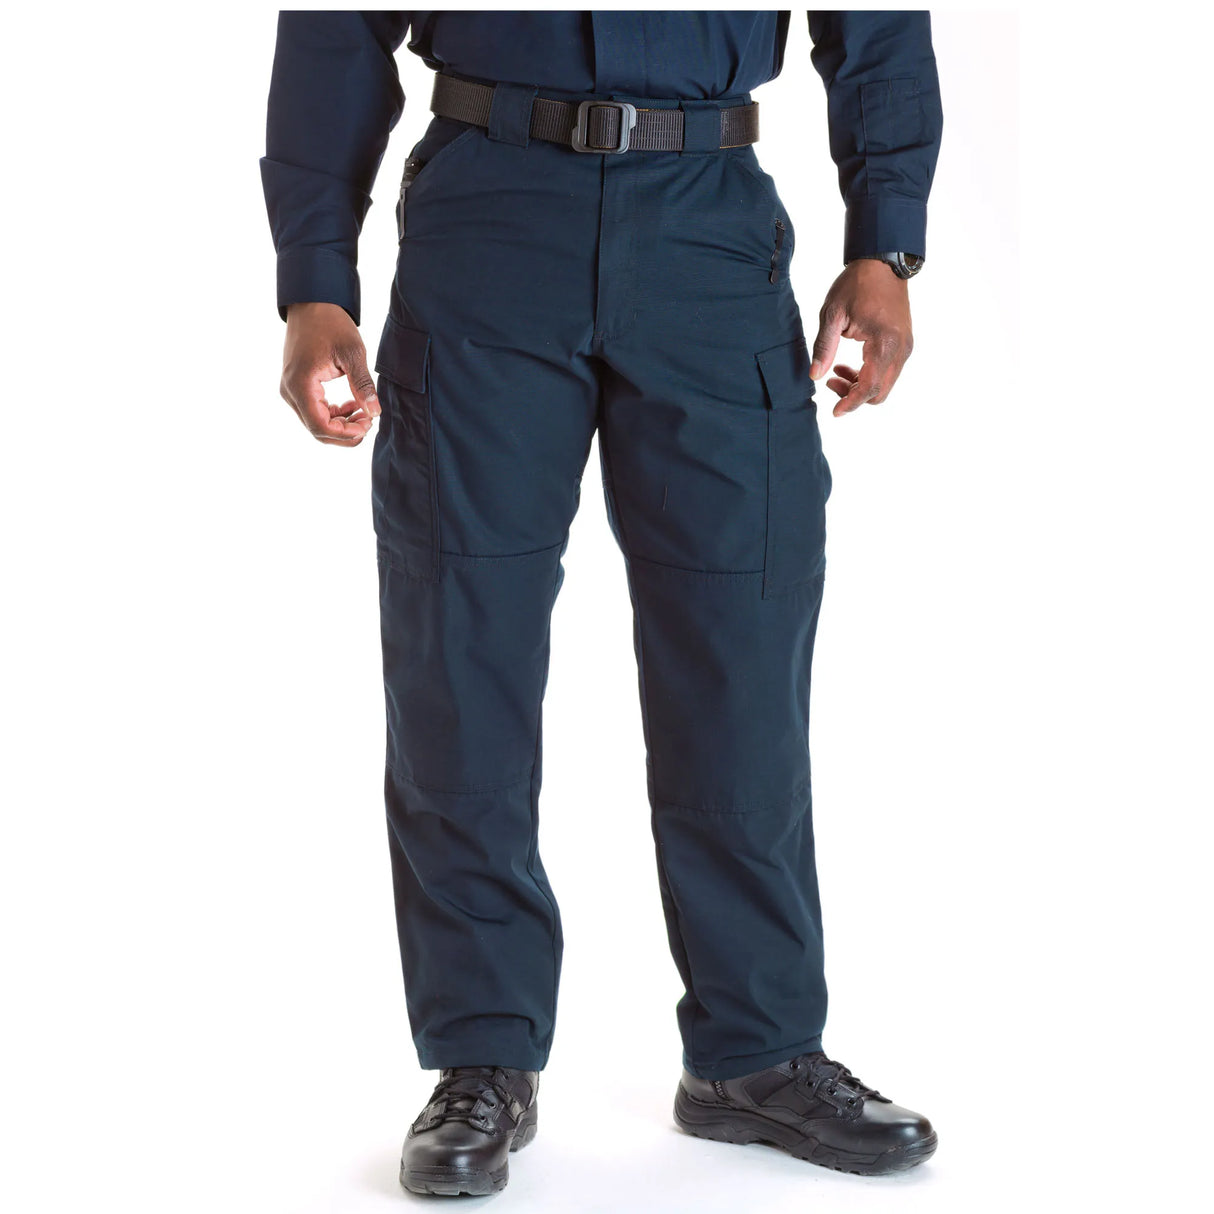 Double-Reinforced Seat Pant: Provides extra durability for prolonged use in rugged environments.